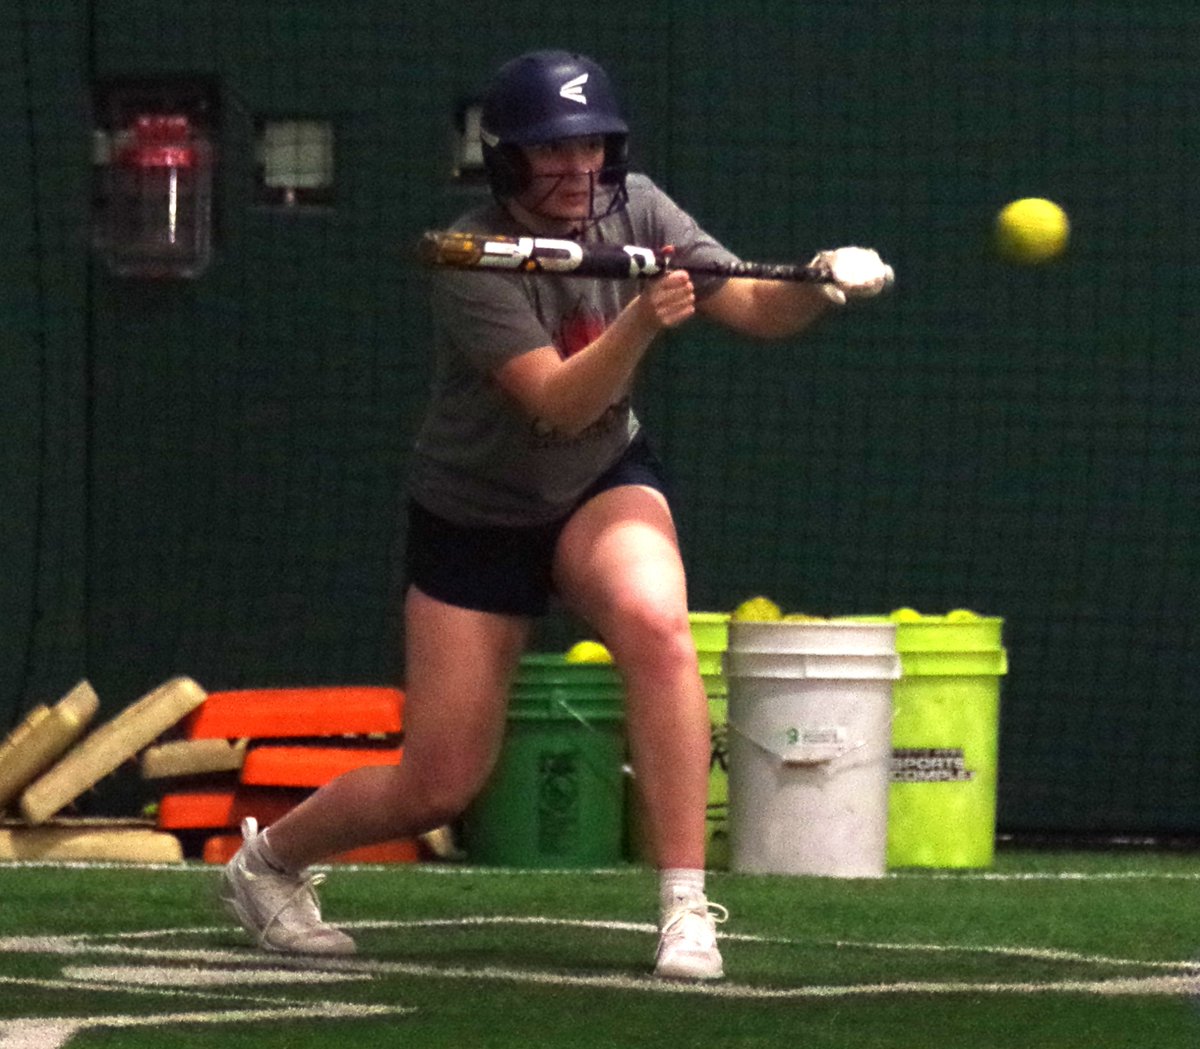 The #Saskatoon #Selects had a smaller under-18 female group out for a training session at the Indoor Training Centre on Tuesday night. The session was a very productive one as the players got lots of reps on defence and at the plate. #PrideofHome. #Wearefamily. #Yxe.